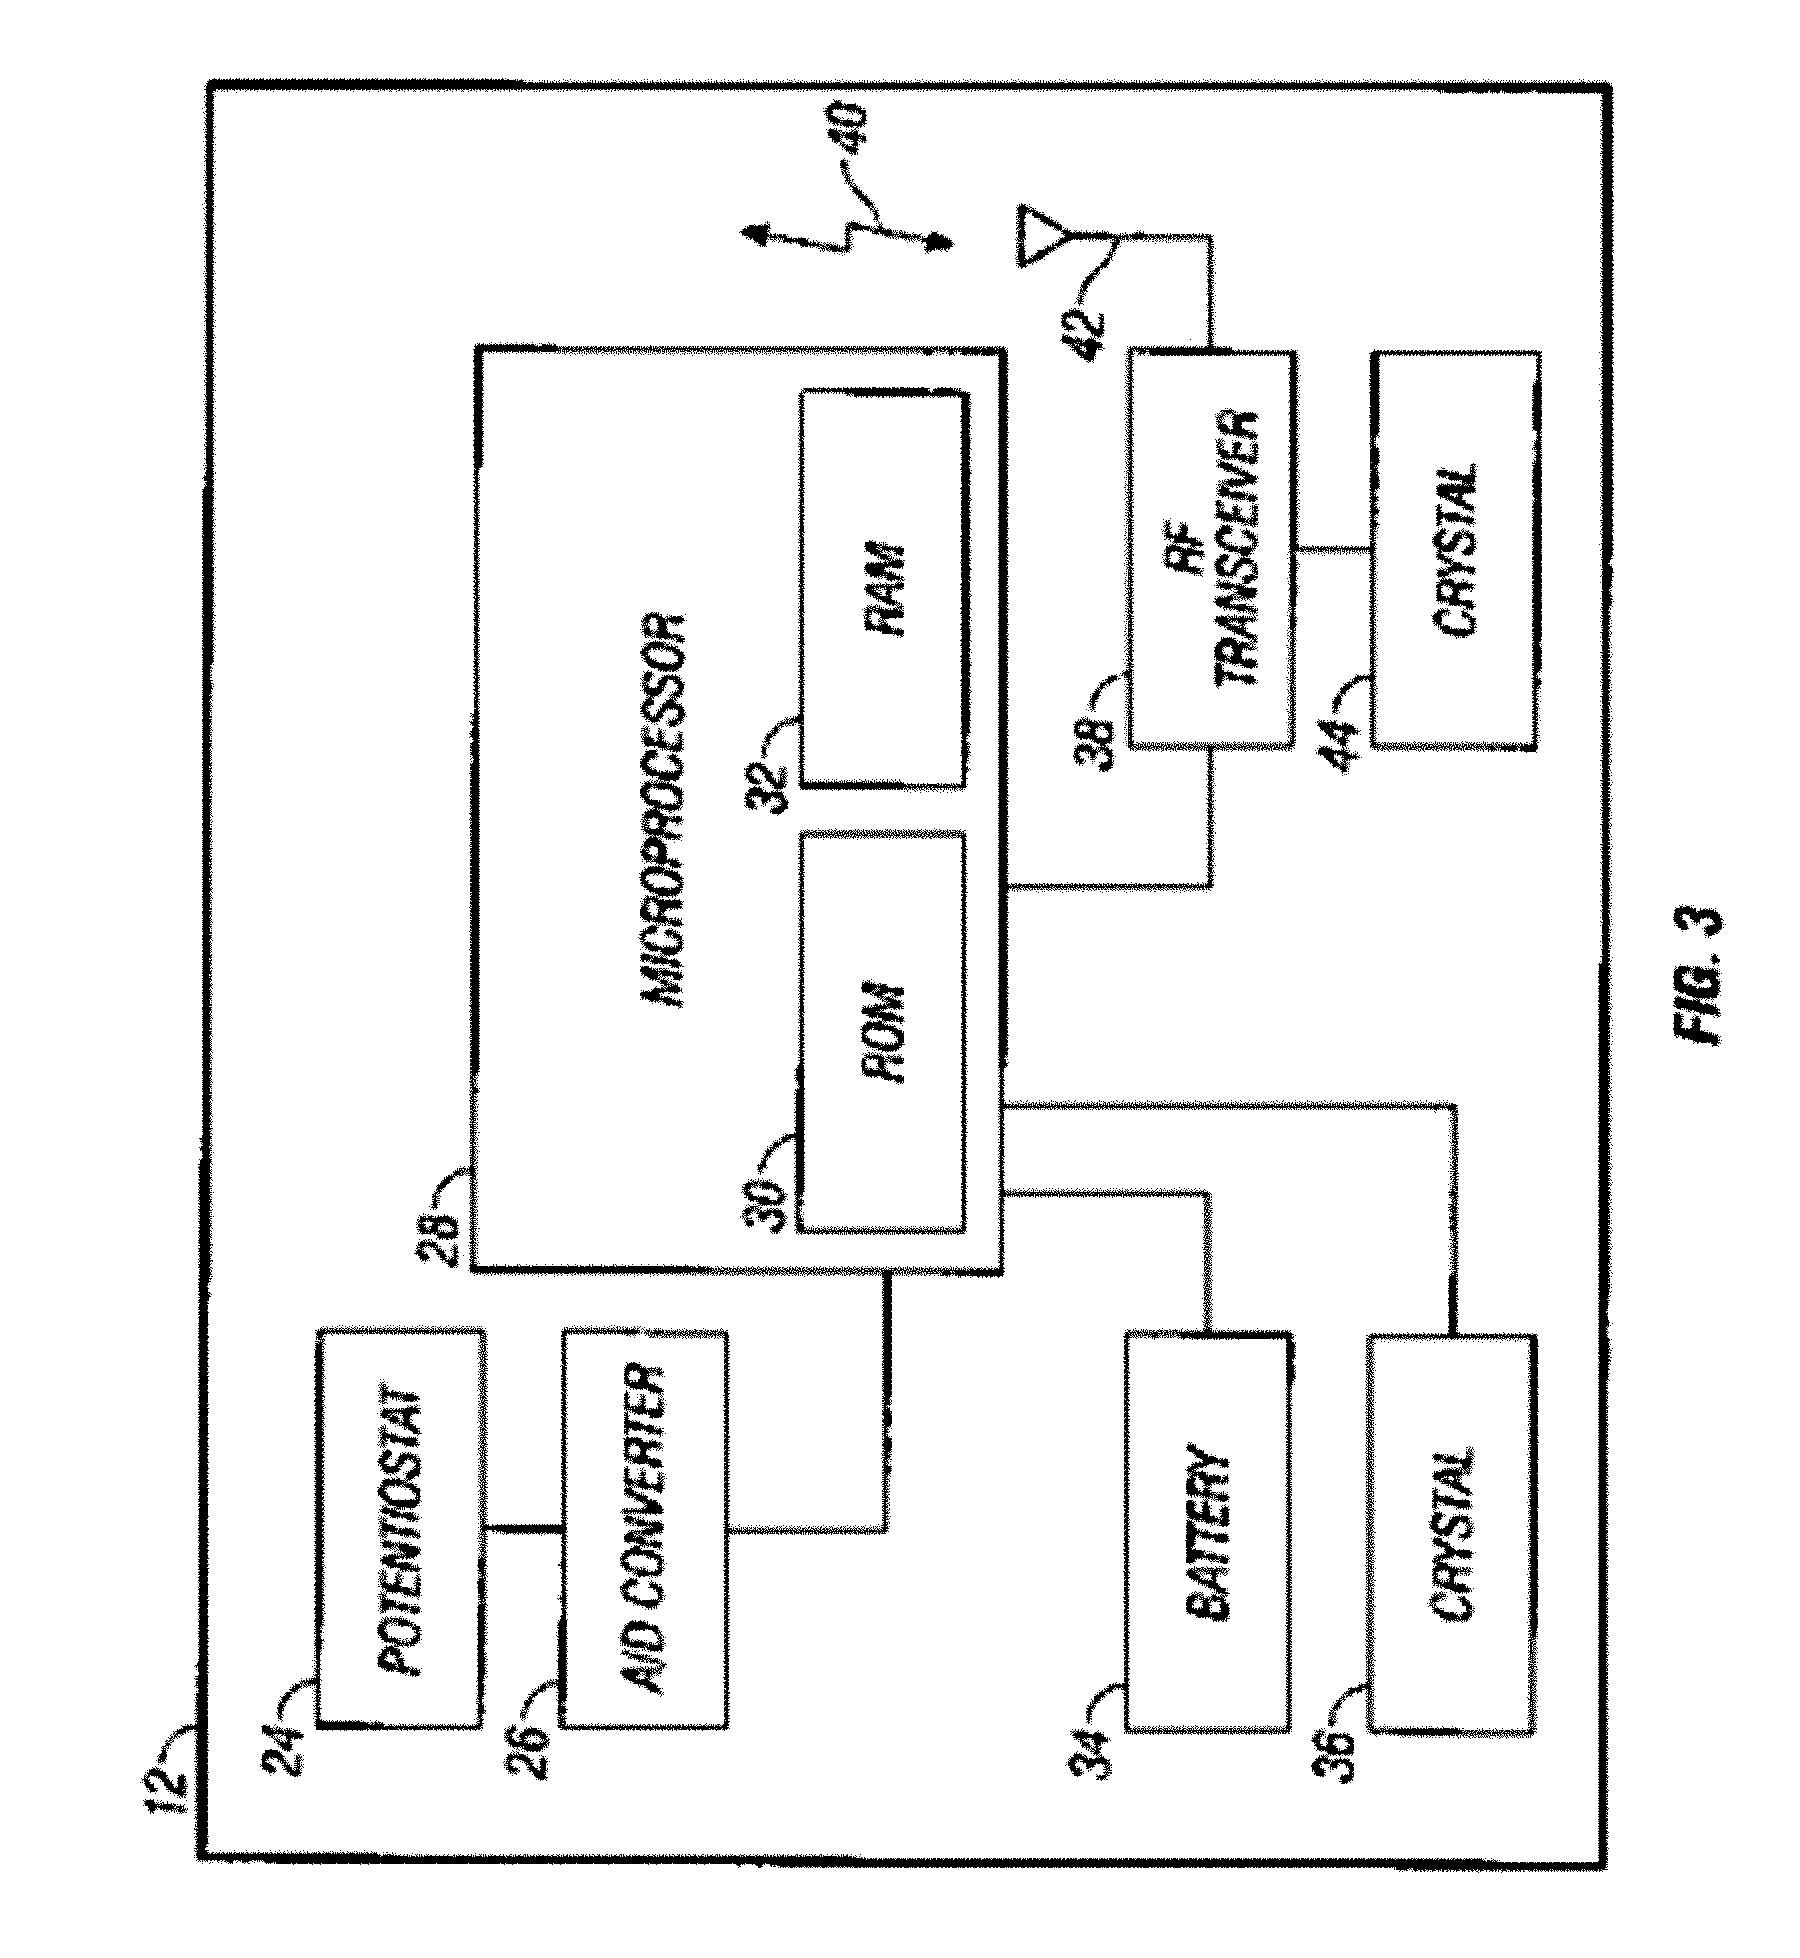 Integrated delivery device for continuous glucose sensor